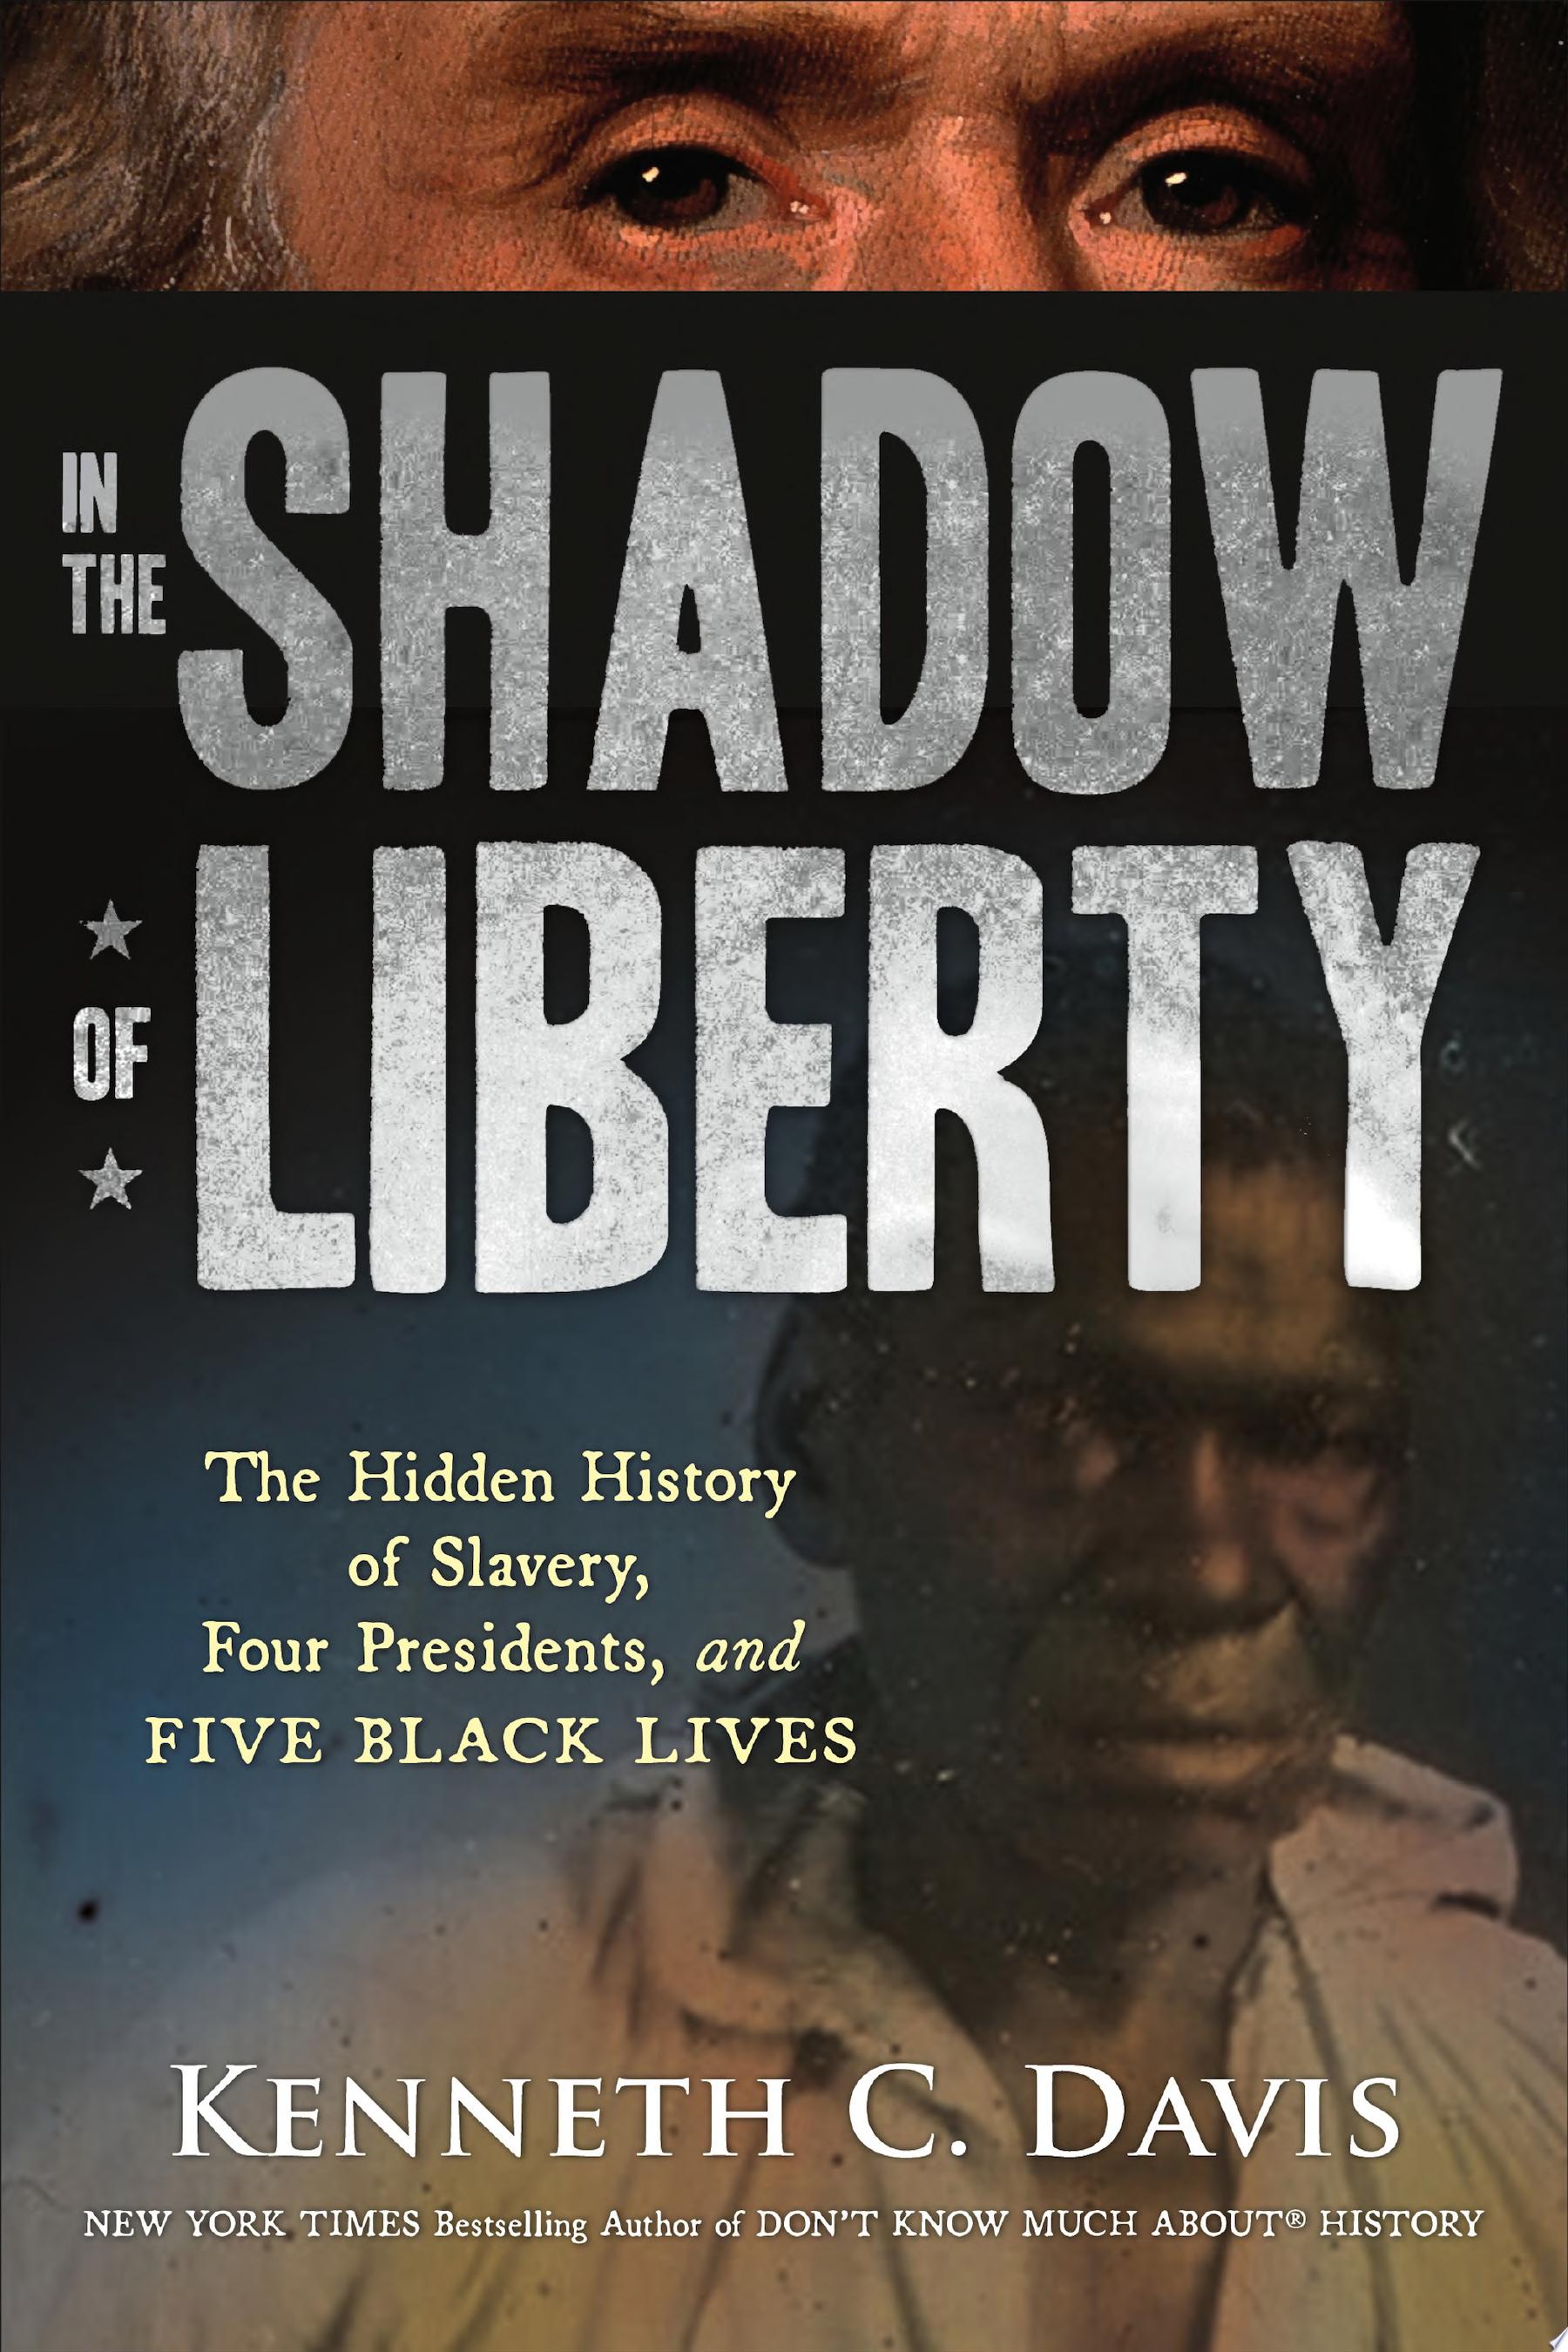 Image for "In the Shadow of Liberty"